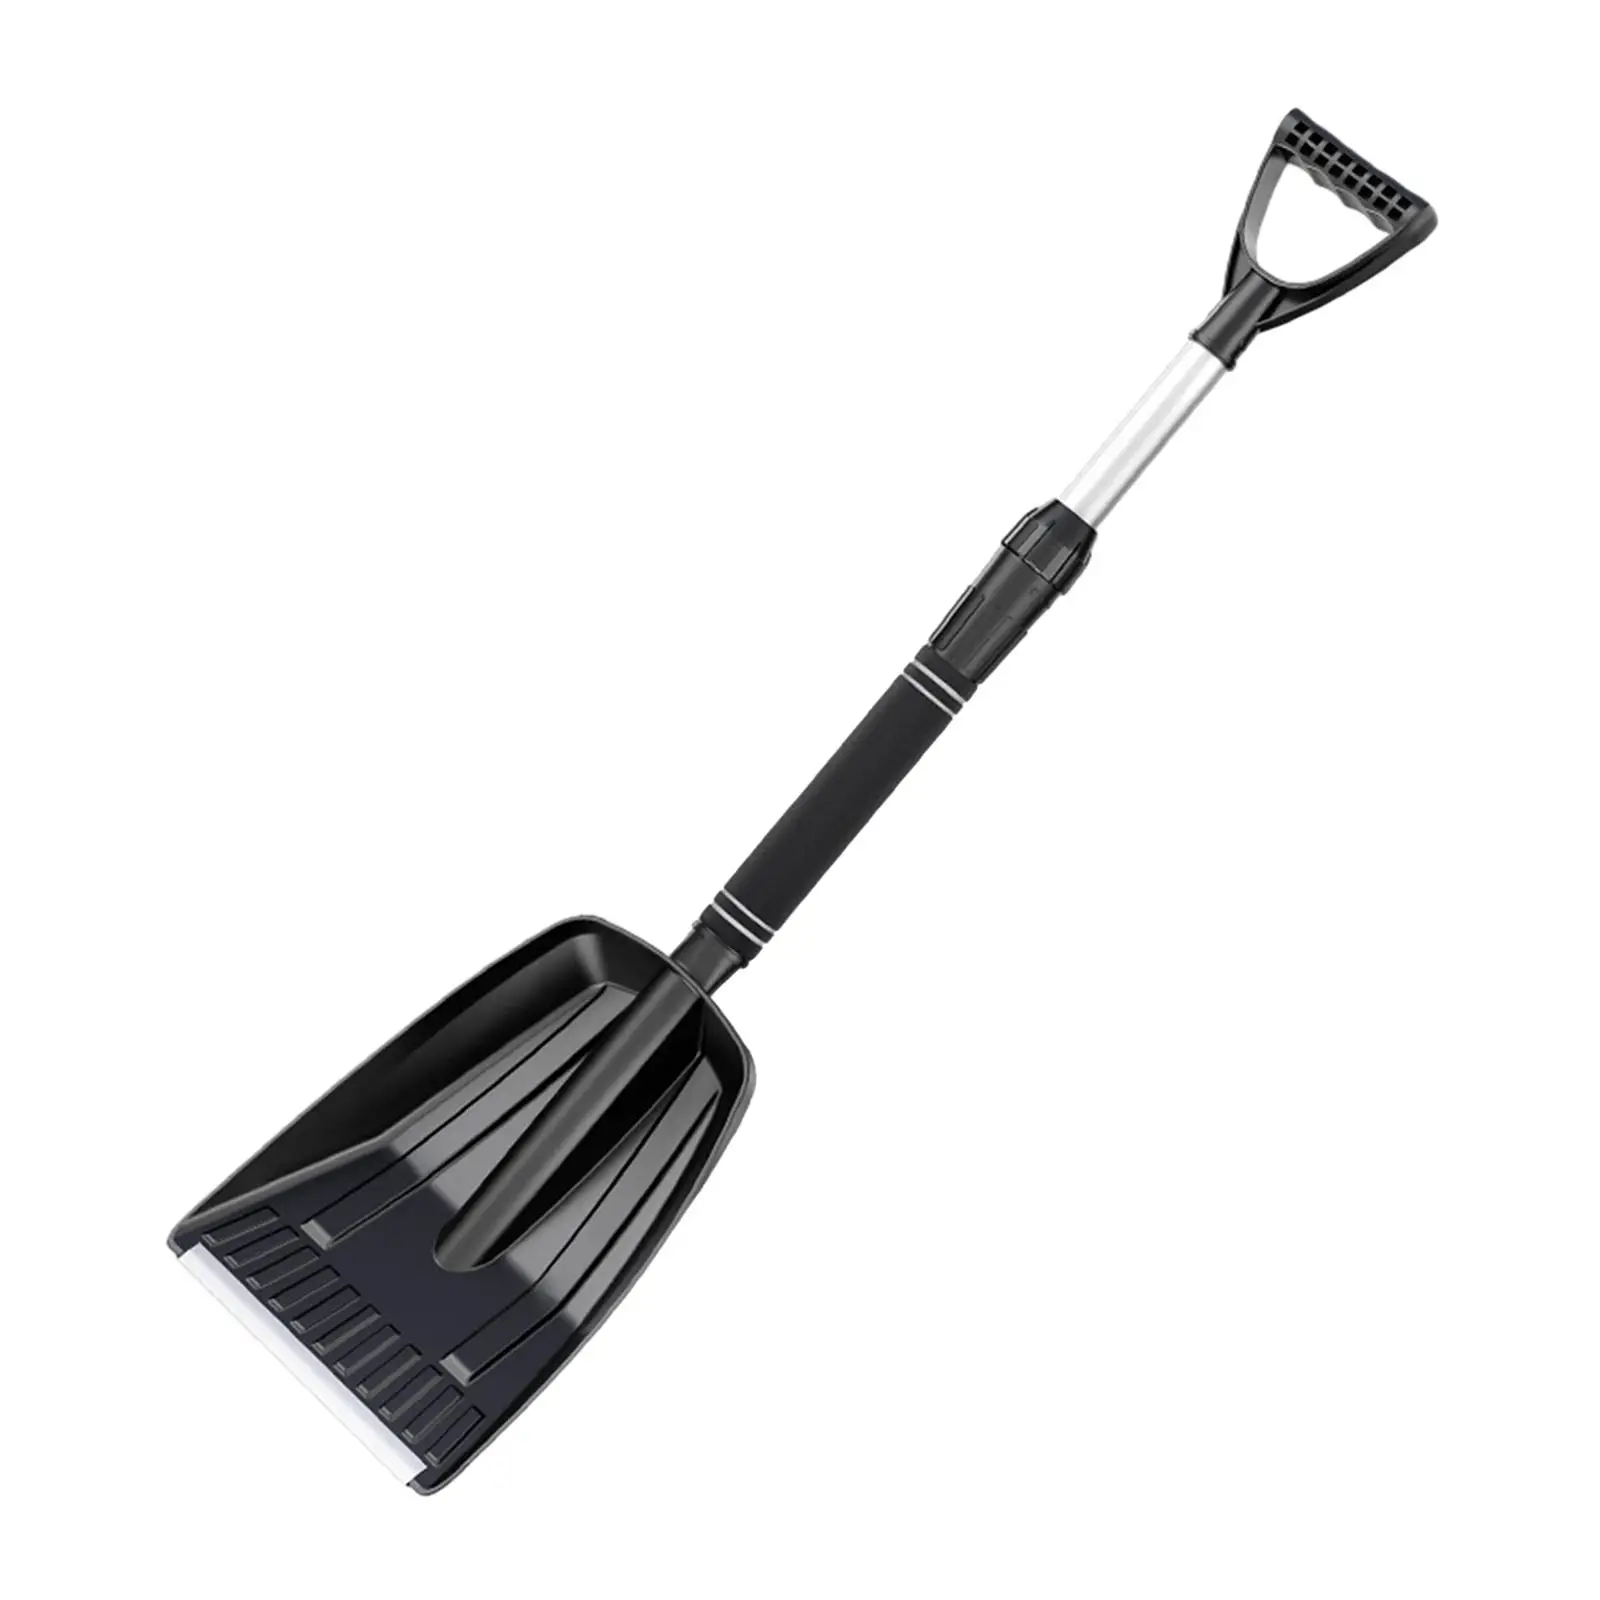 Snow Shovel Lightweight Window Cleaning with Foam Handle Portable Retractable Snow Shovel for Car Suvs Garden Beach Camping